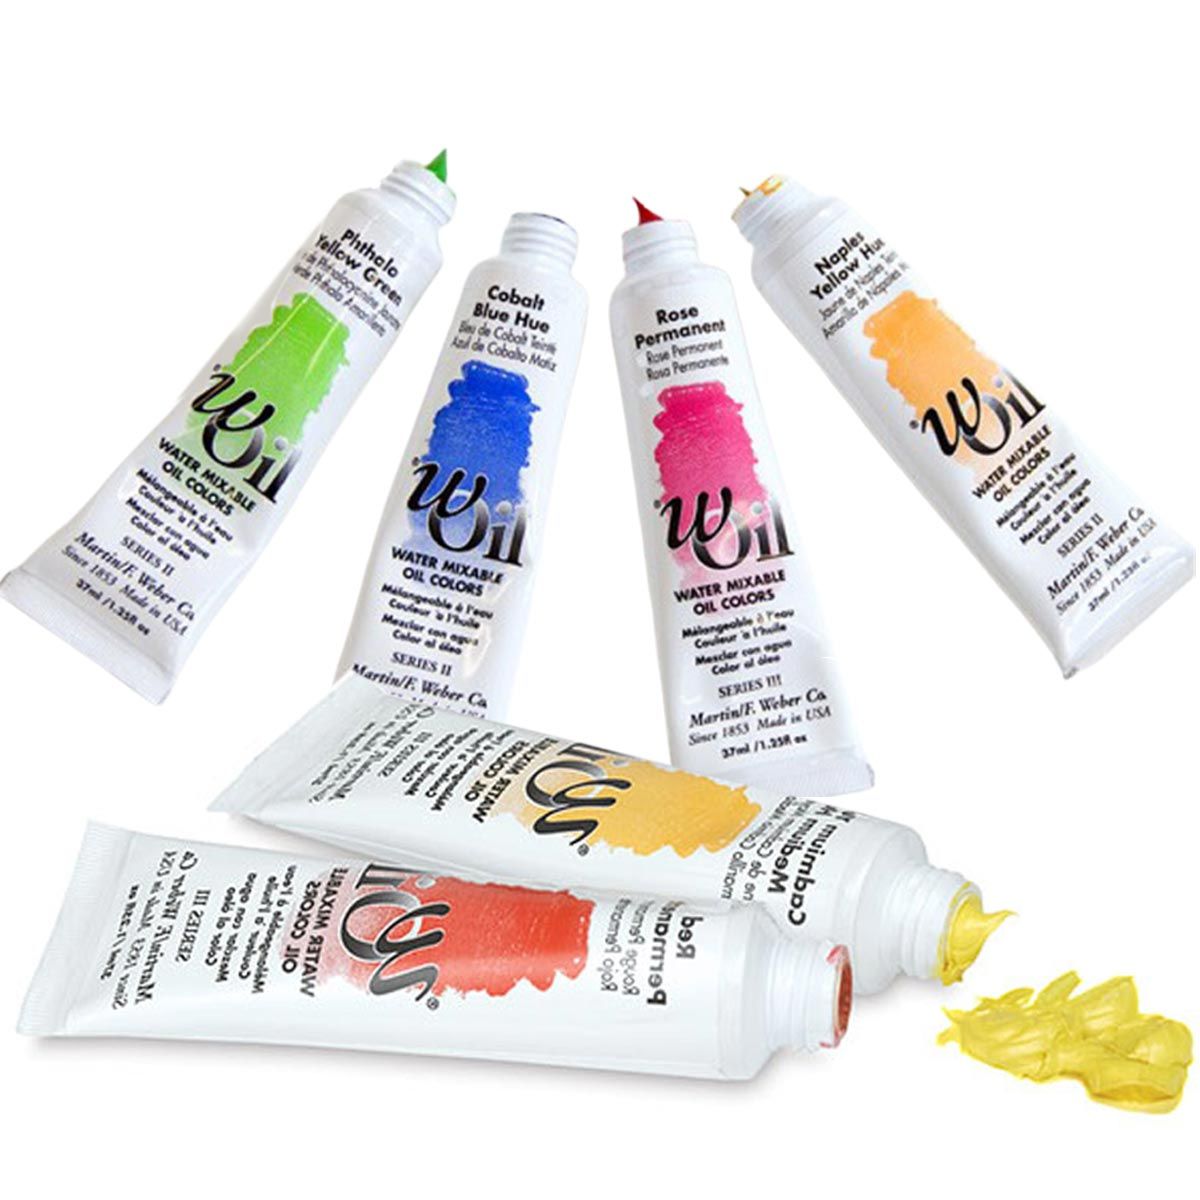 wOil Water Mixable Artist Oil Paint  Open Stock